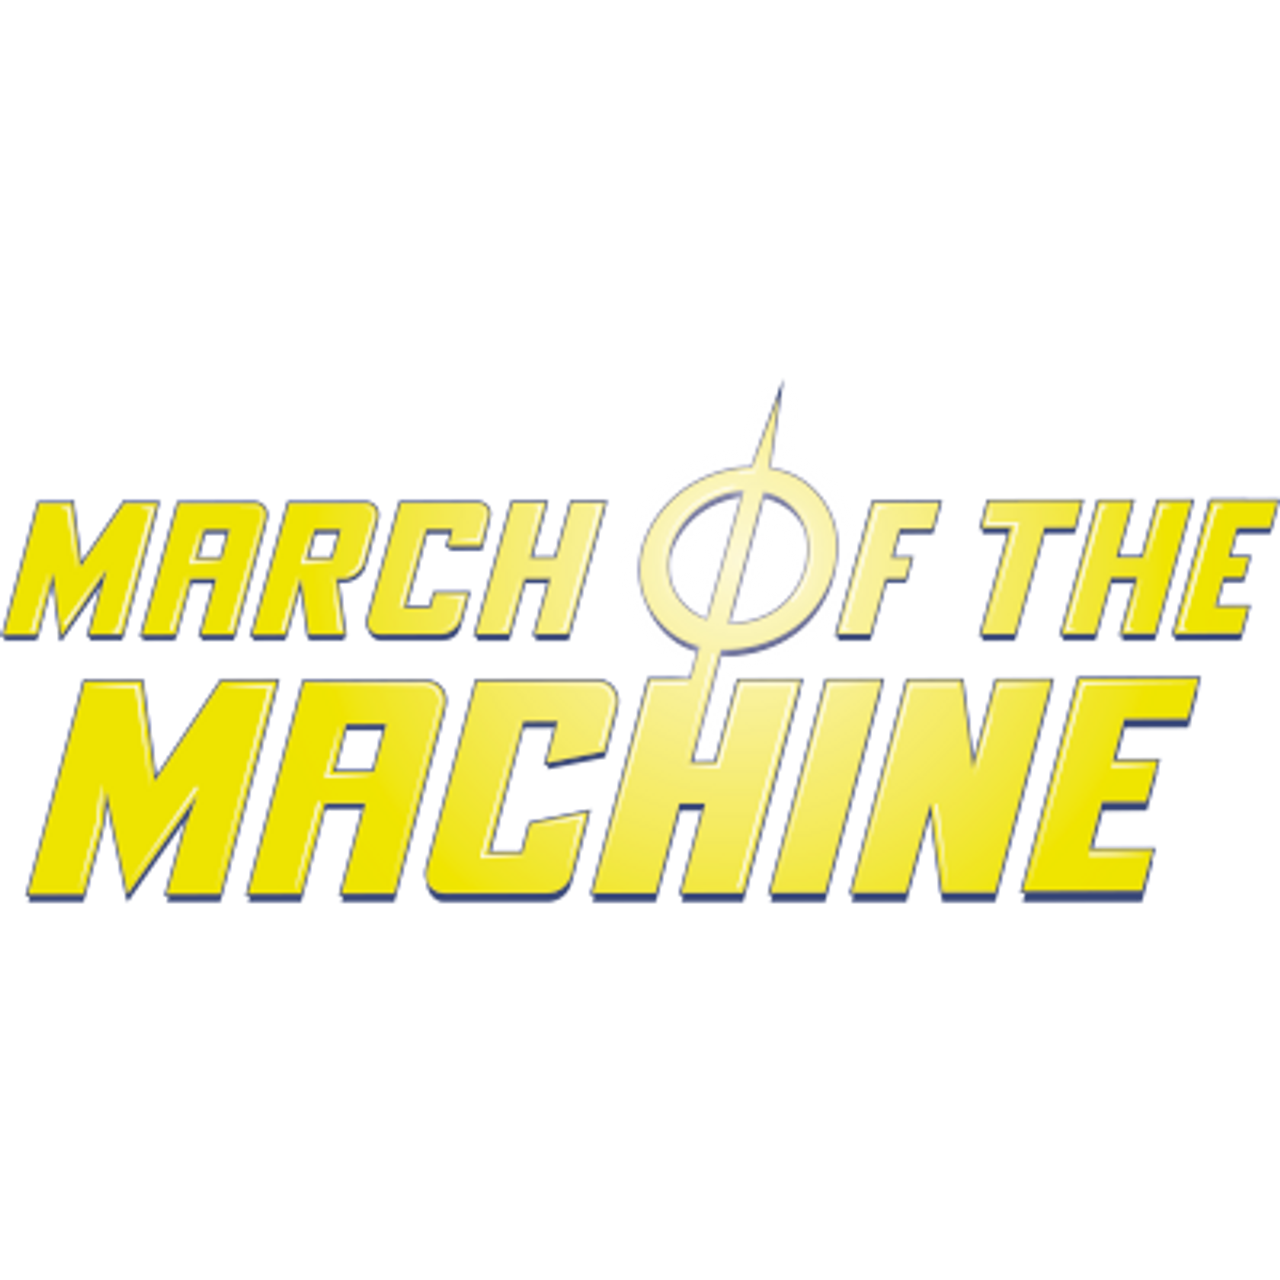 March of the Machine